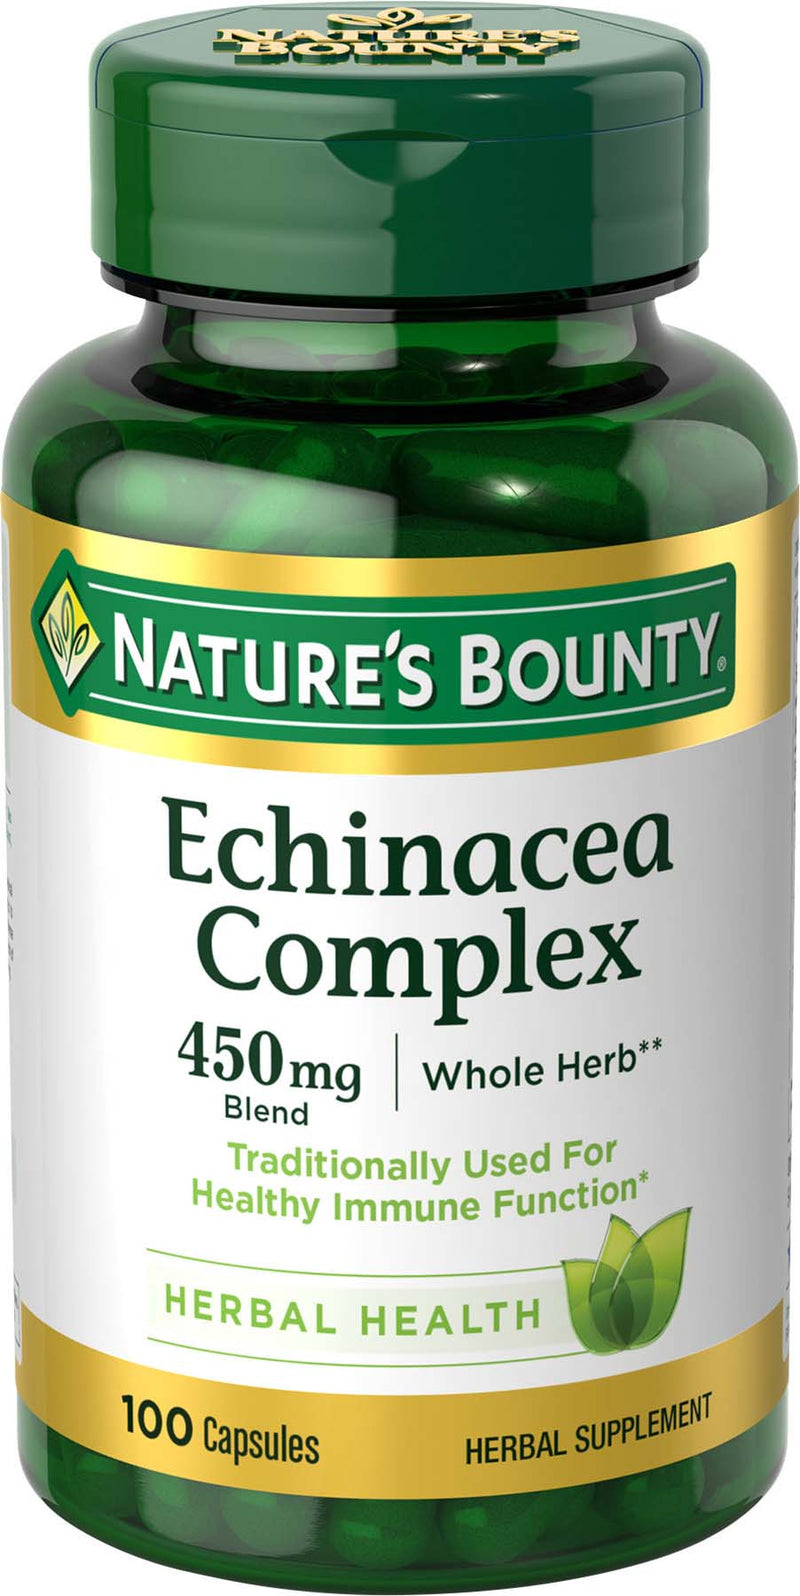 Nature's Bounty Echinacea Complex 450mg Blend - Herbal Supplement - 100 capsules